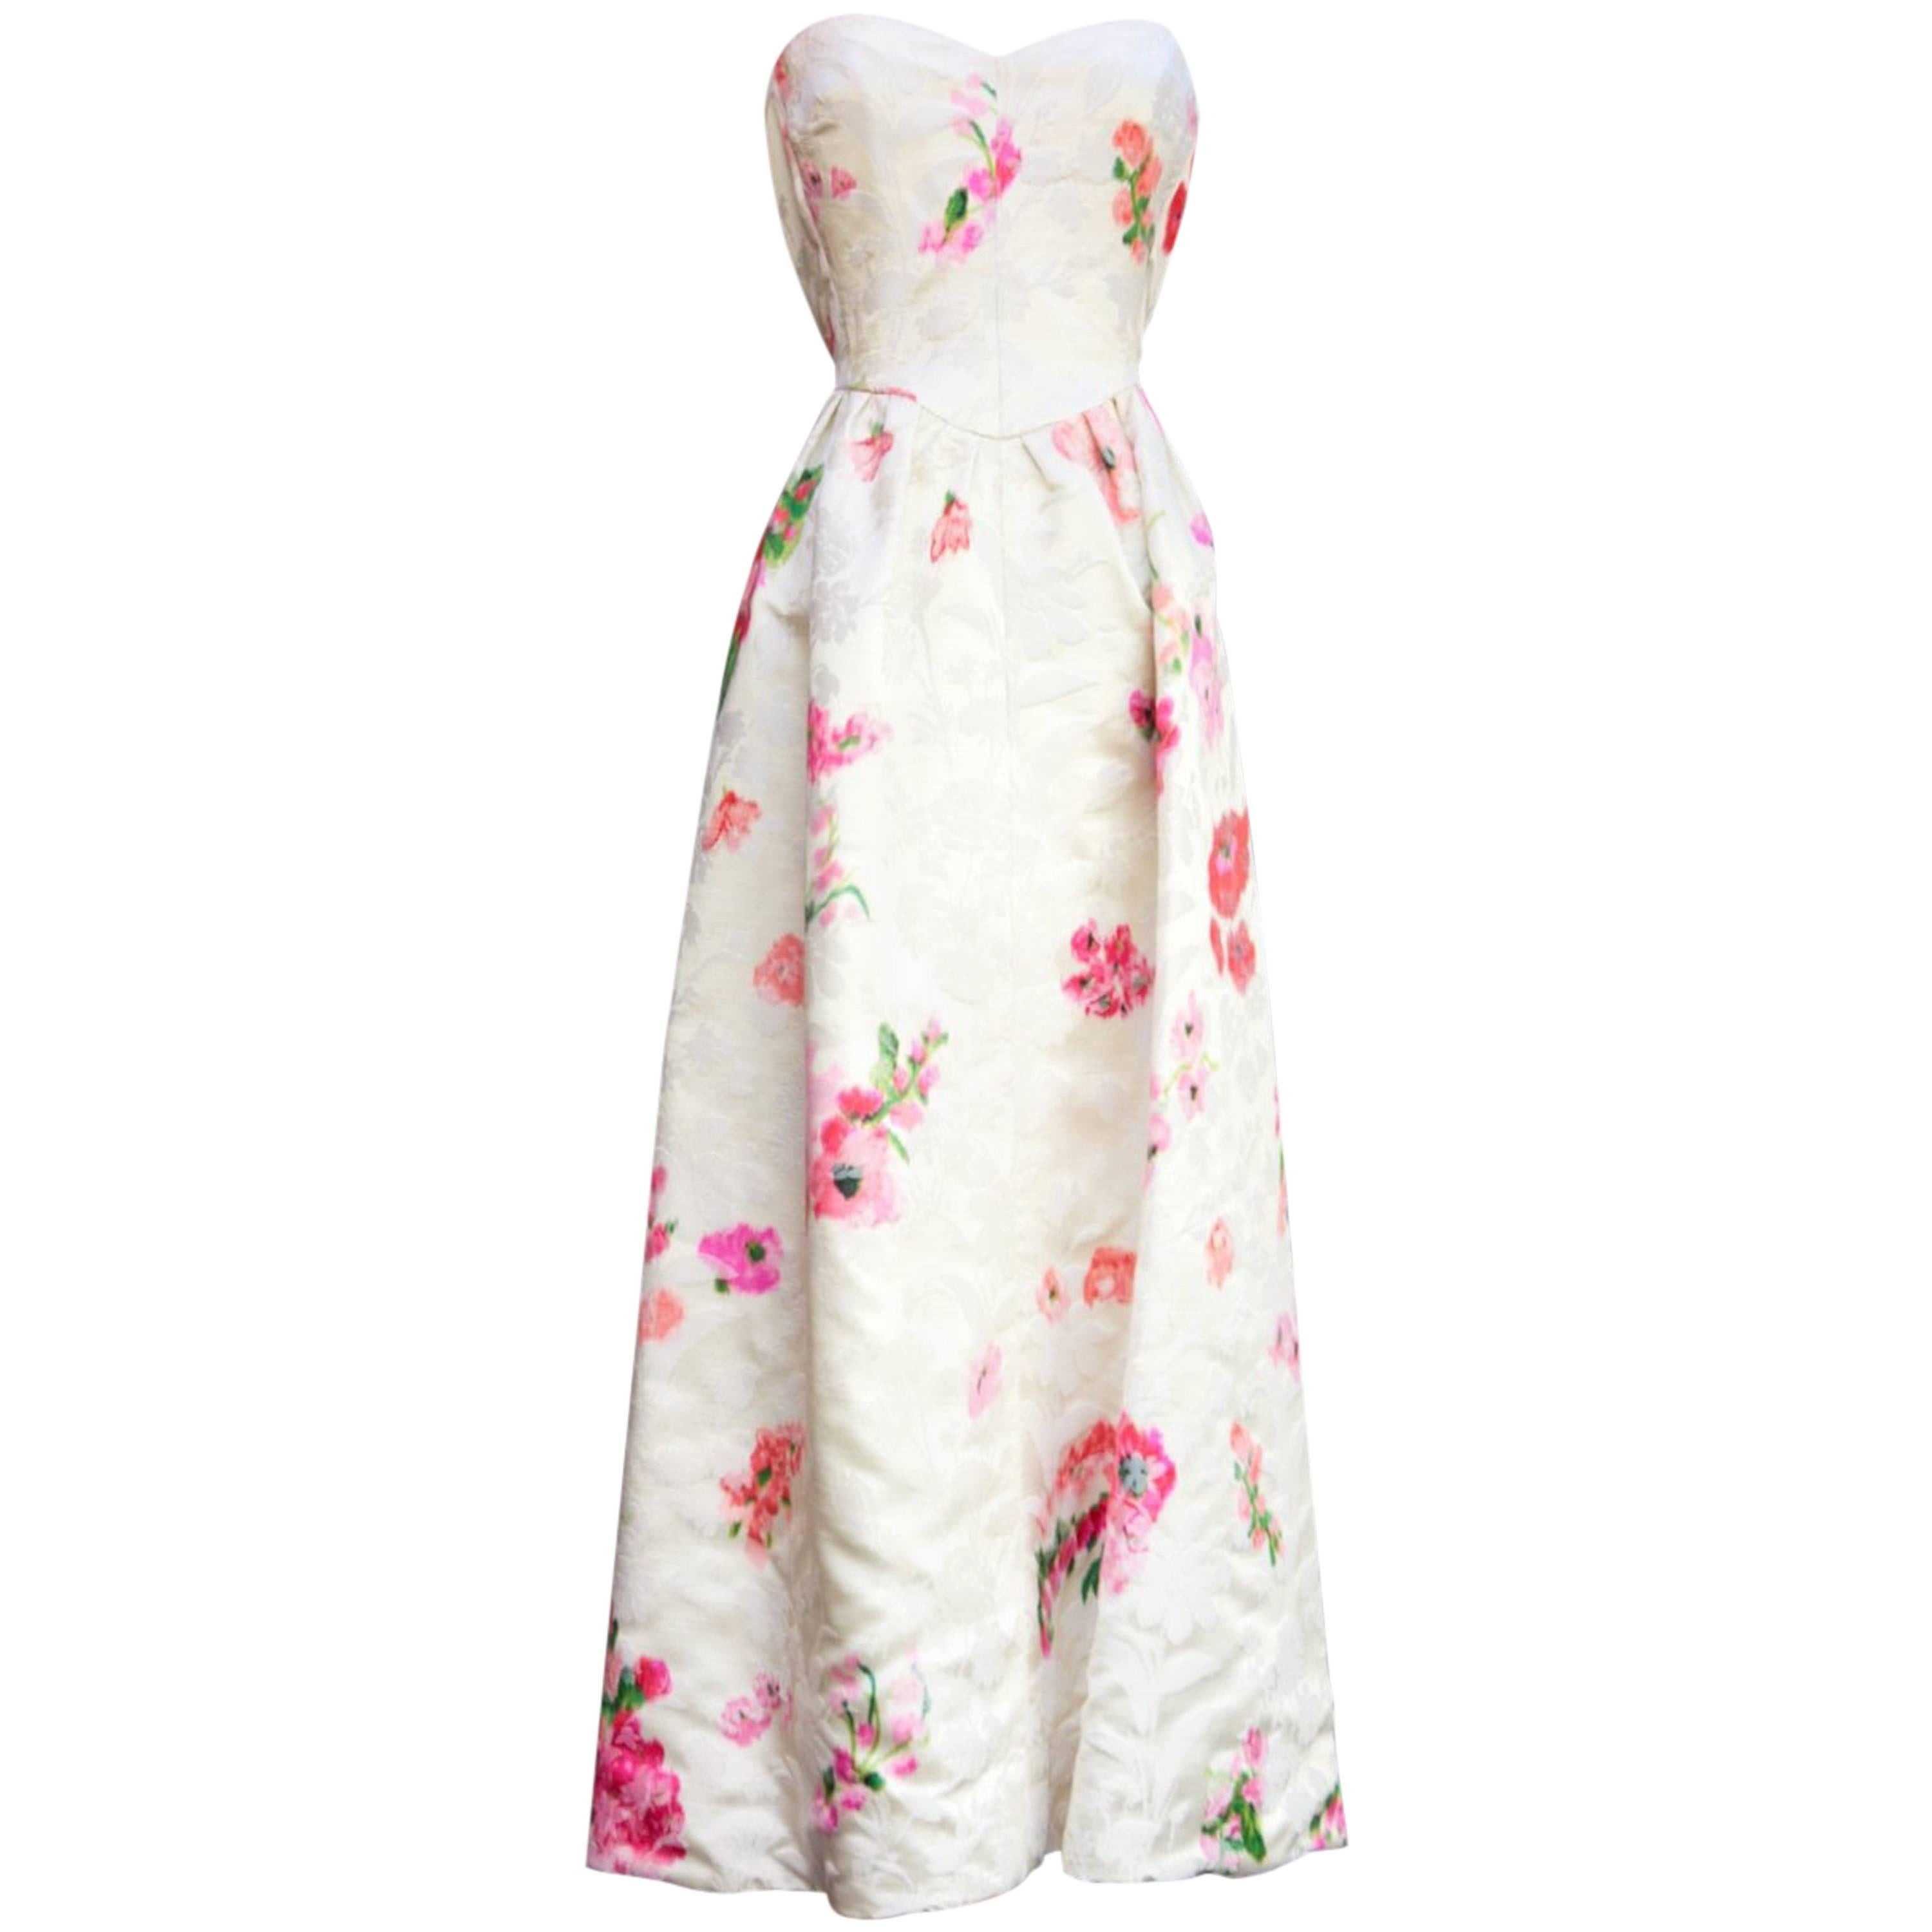 Nina Ricci Haute Couture long white bustier dress with pink flowers